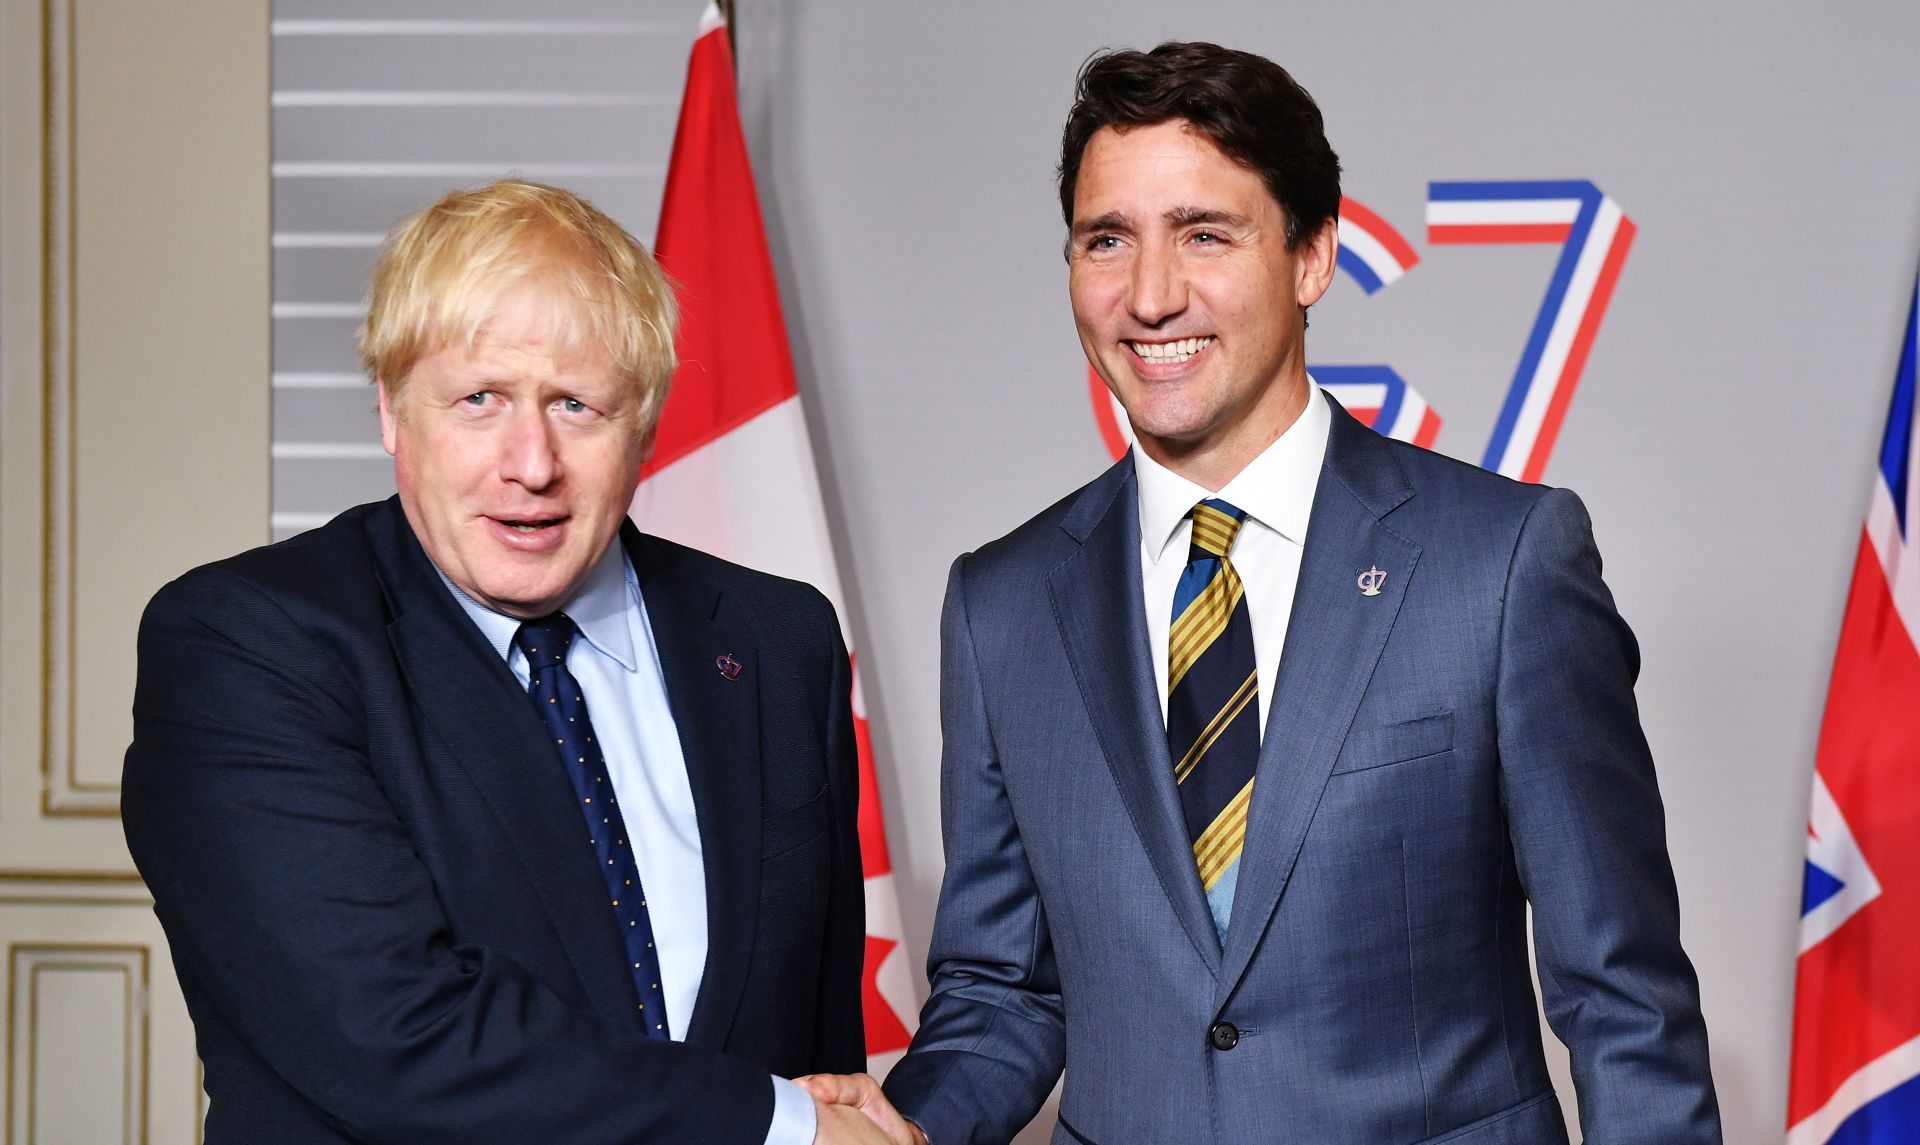 epa07790424 British Prime Minister Boris Johnson (L) shakes hands with Prime Minister of Canada Justin Trudeau ahead of a bilateral meeting in Biarritz, France, 24 August 2019. The French southwestern seaside resort of Biarritz is hosting the 45th G7 summit from August 24 to 26.  EPA/JEFF J MITCHELL / POOL